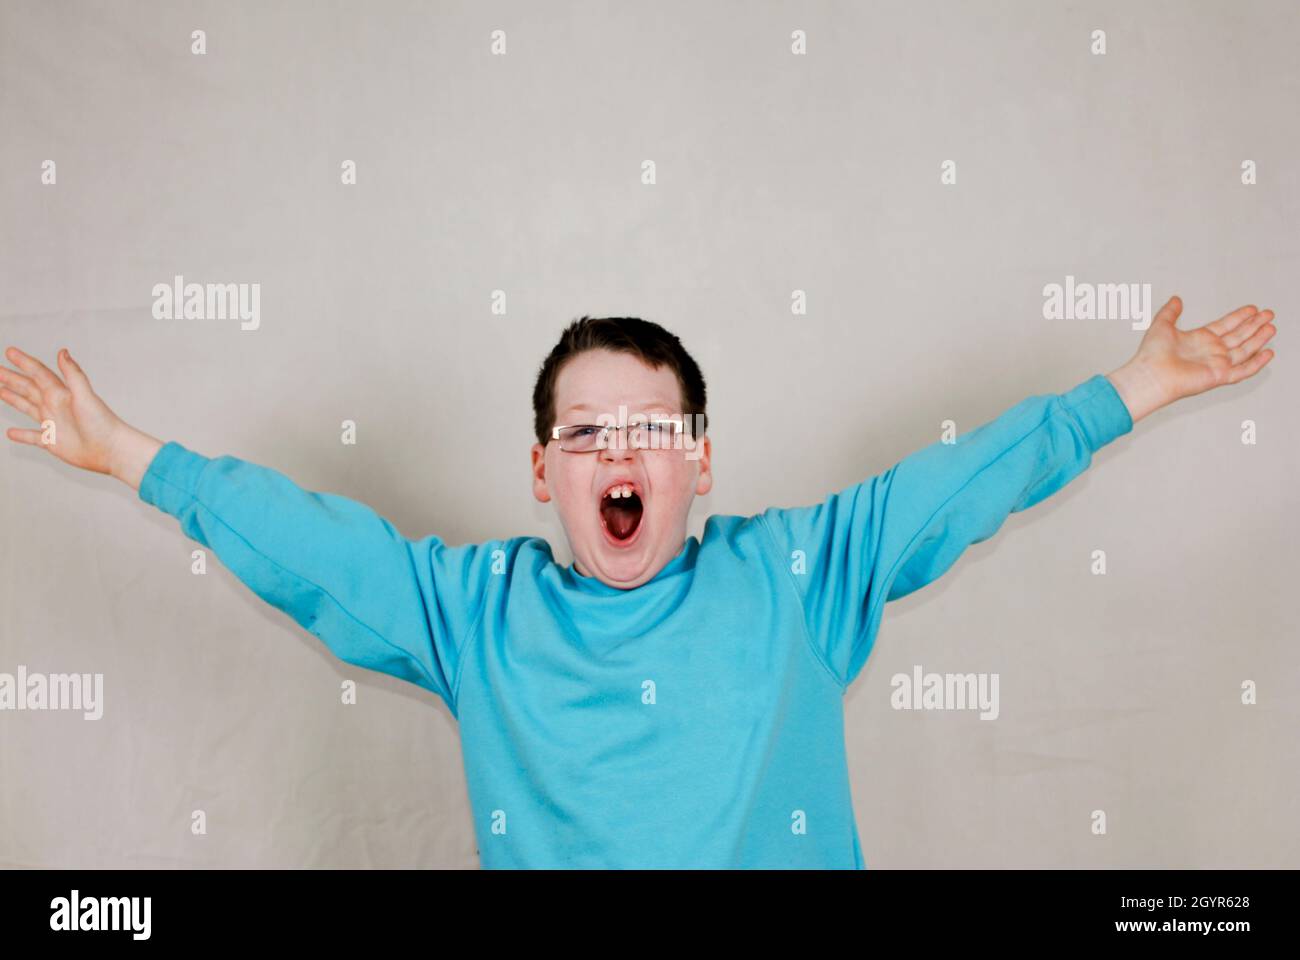 Smiling boy with arms outstretched demonstrating size Stock Photo